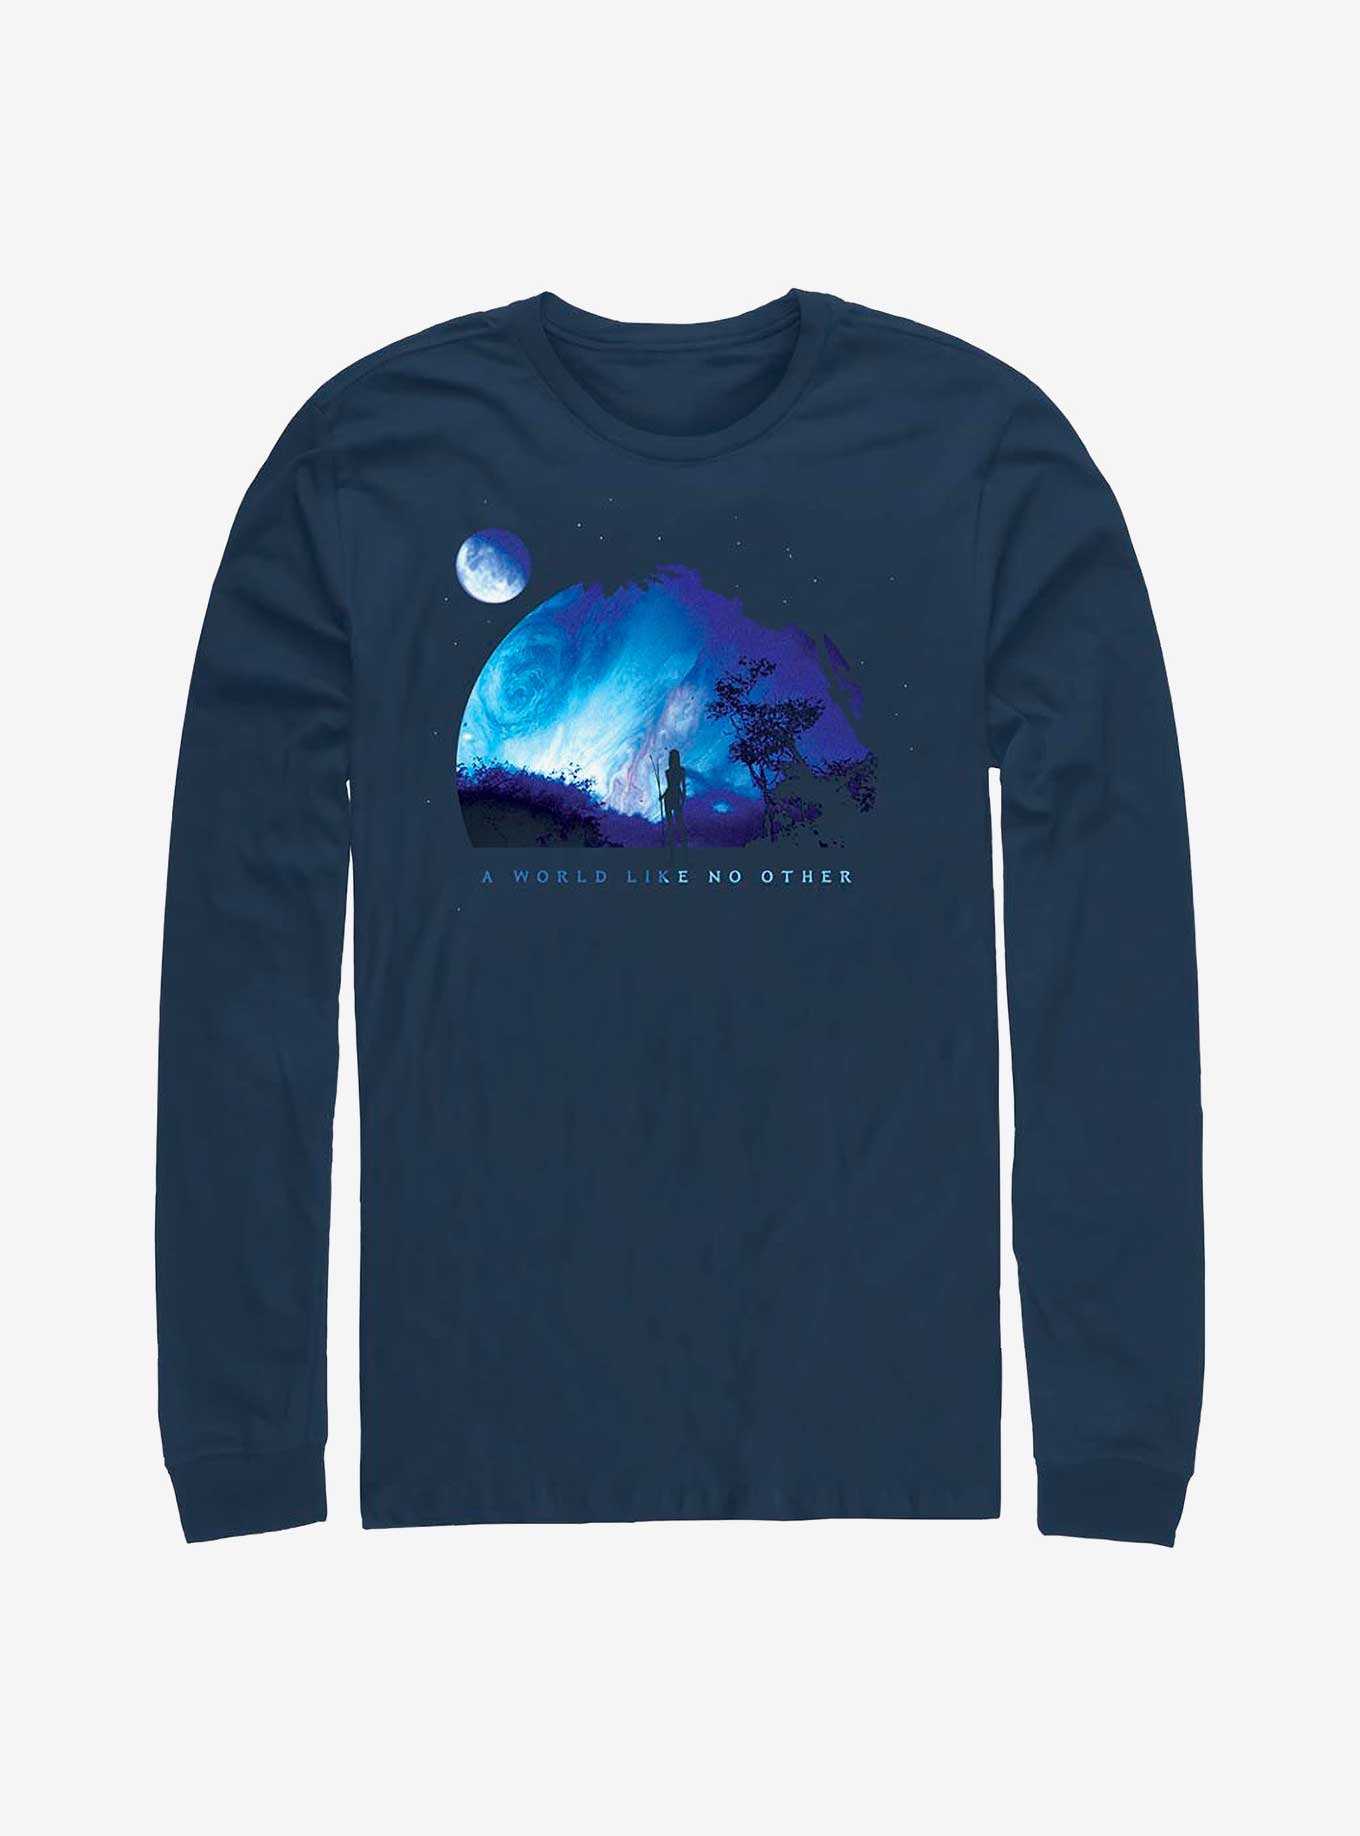 Avatar A World Like No Other Long-Sleeve T-Shirt, , hi-res